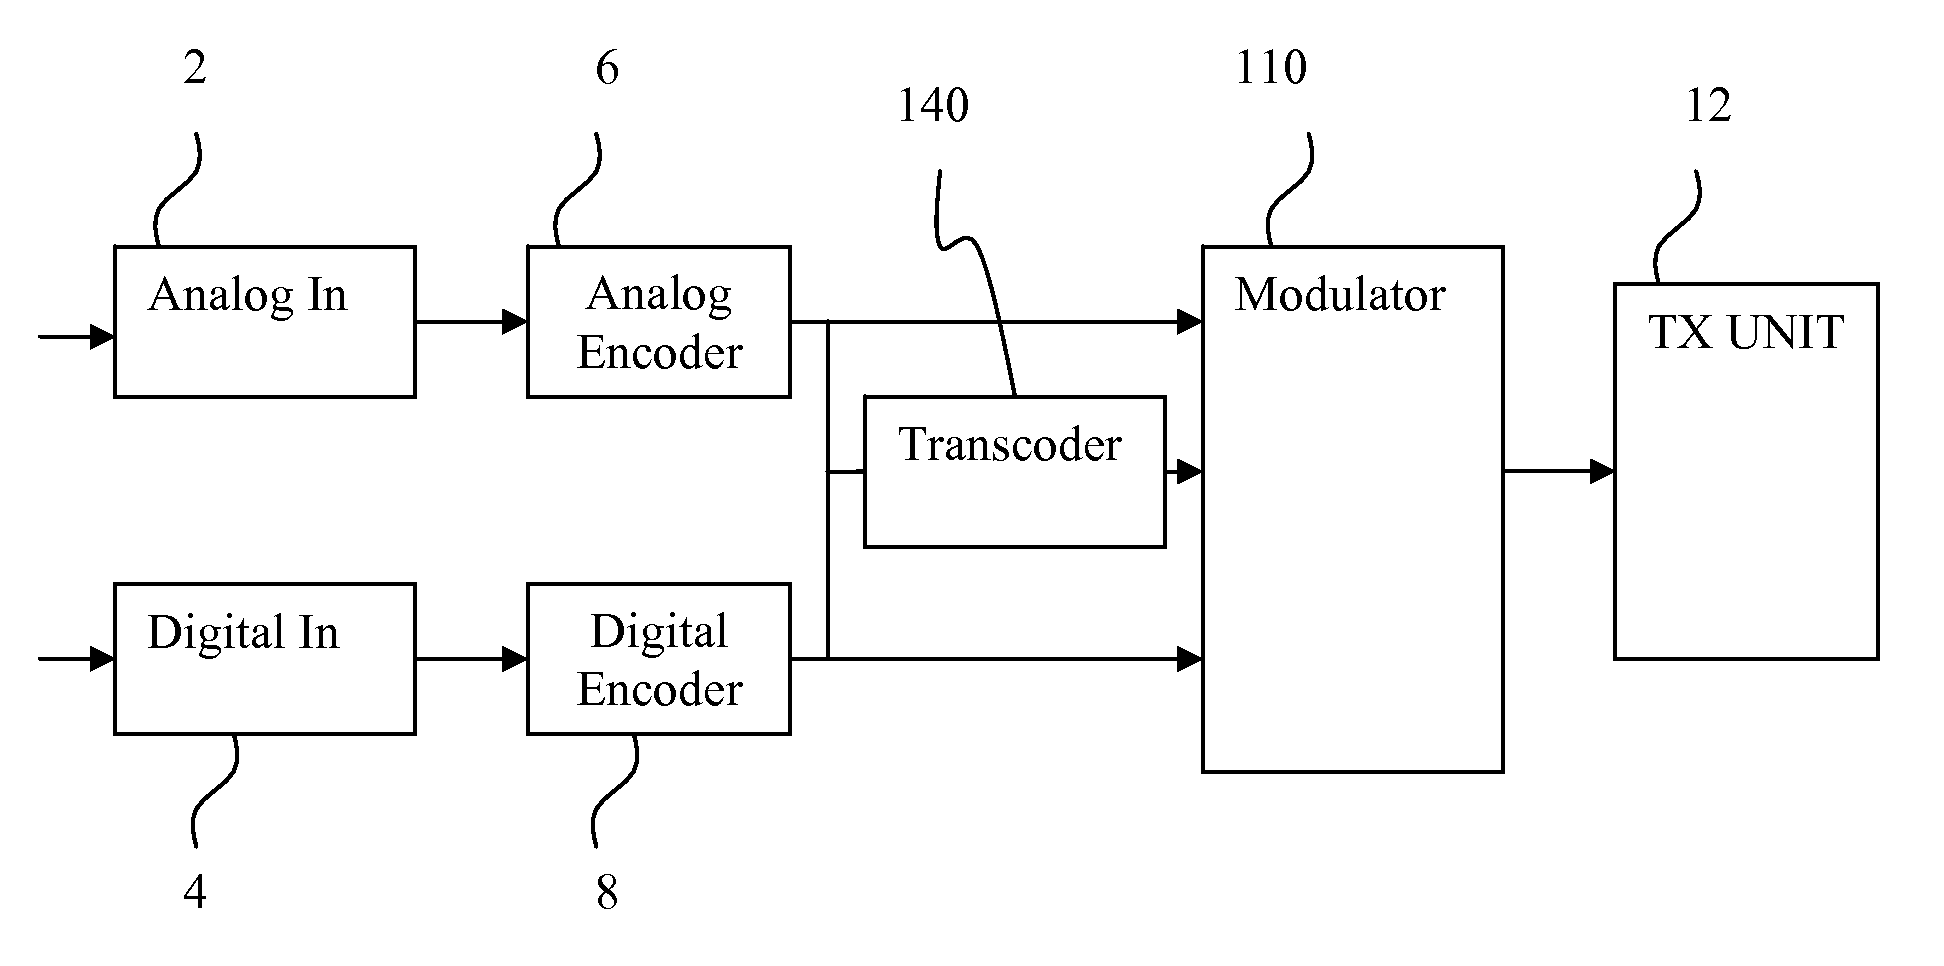 Method and apparatus for providing low resolution images in a broadcast system